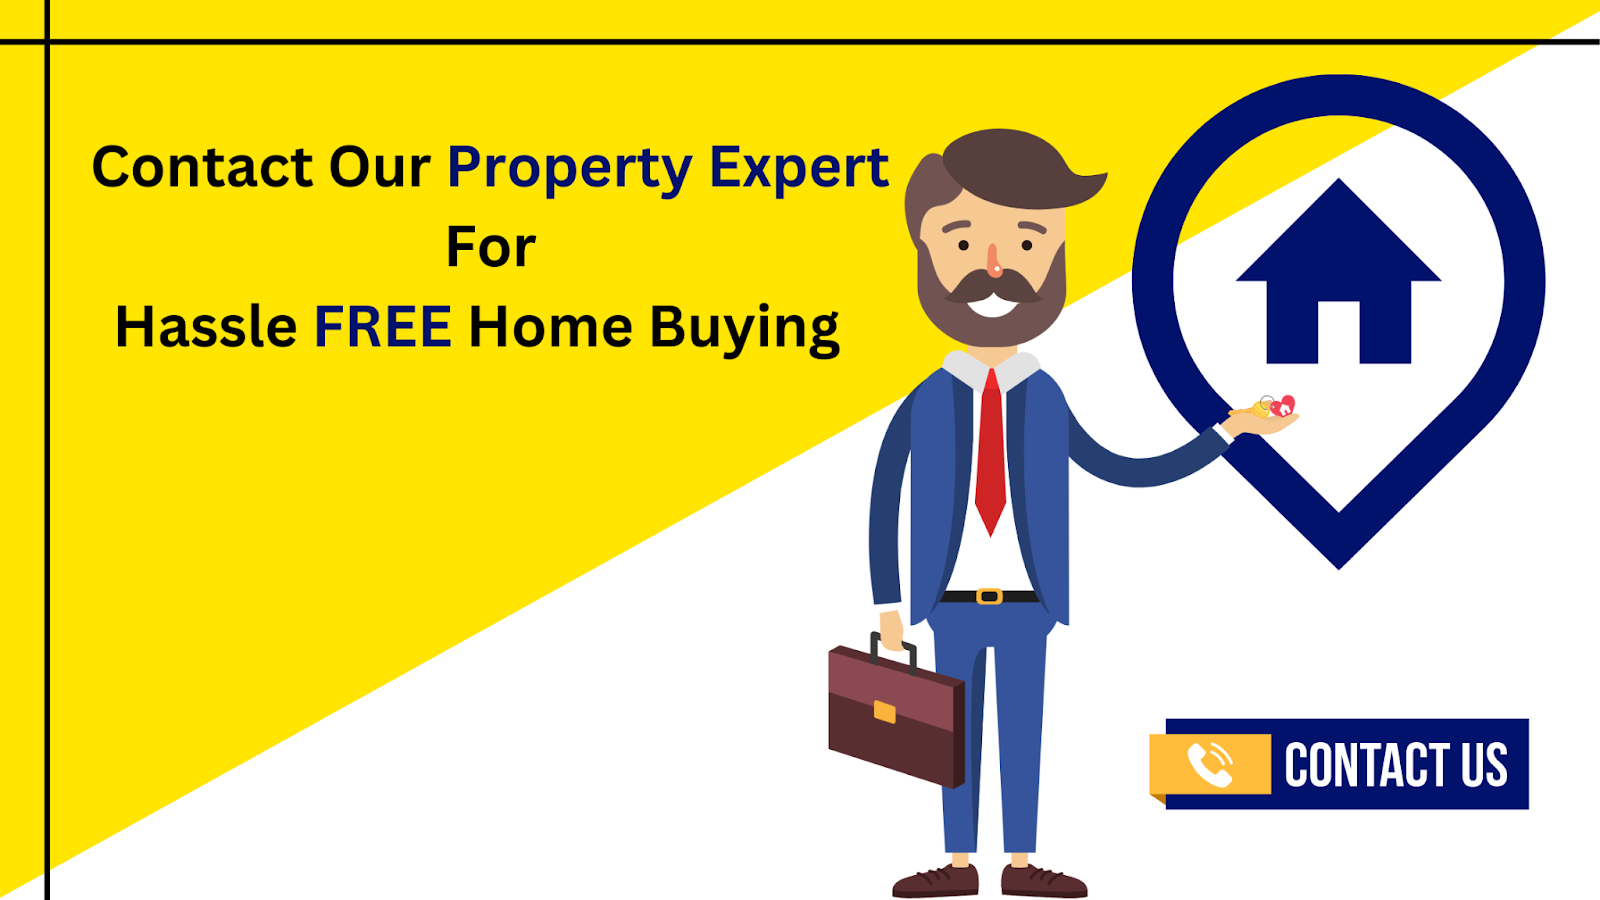 Contact our property experts for hassle-free home buying in the fastest developing city in India